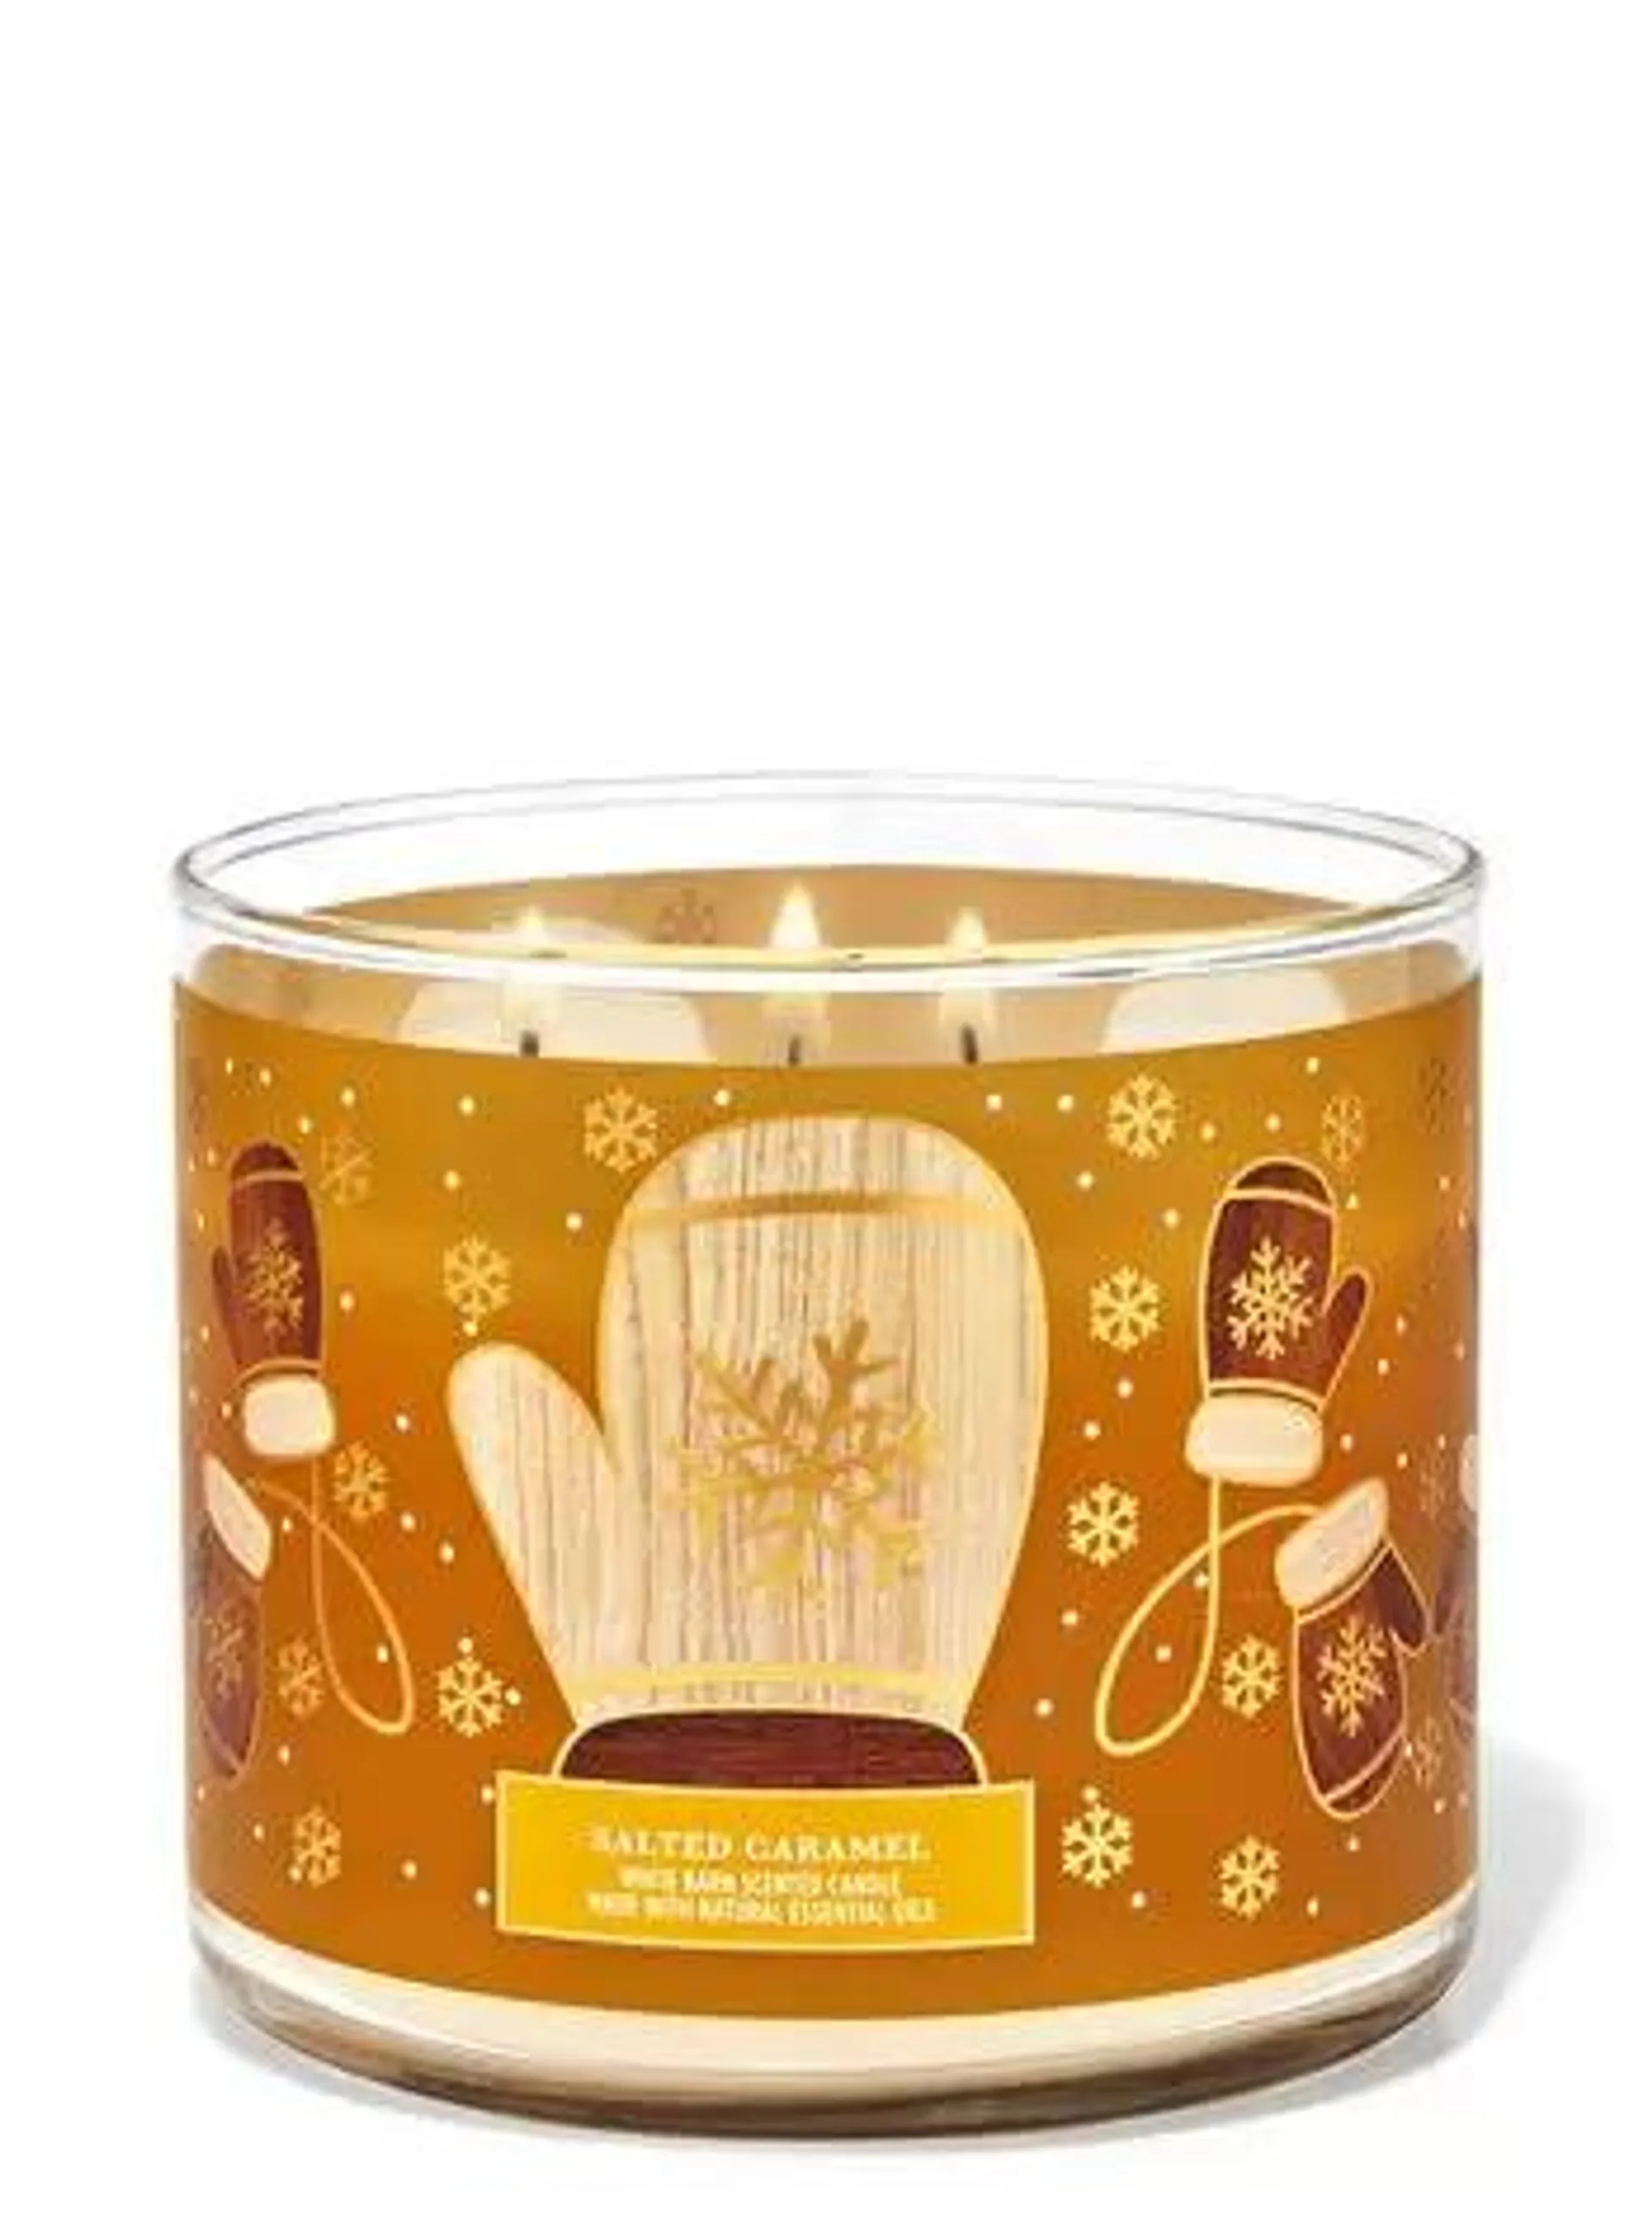 Salted Caramel 3-Wick Candle